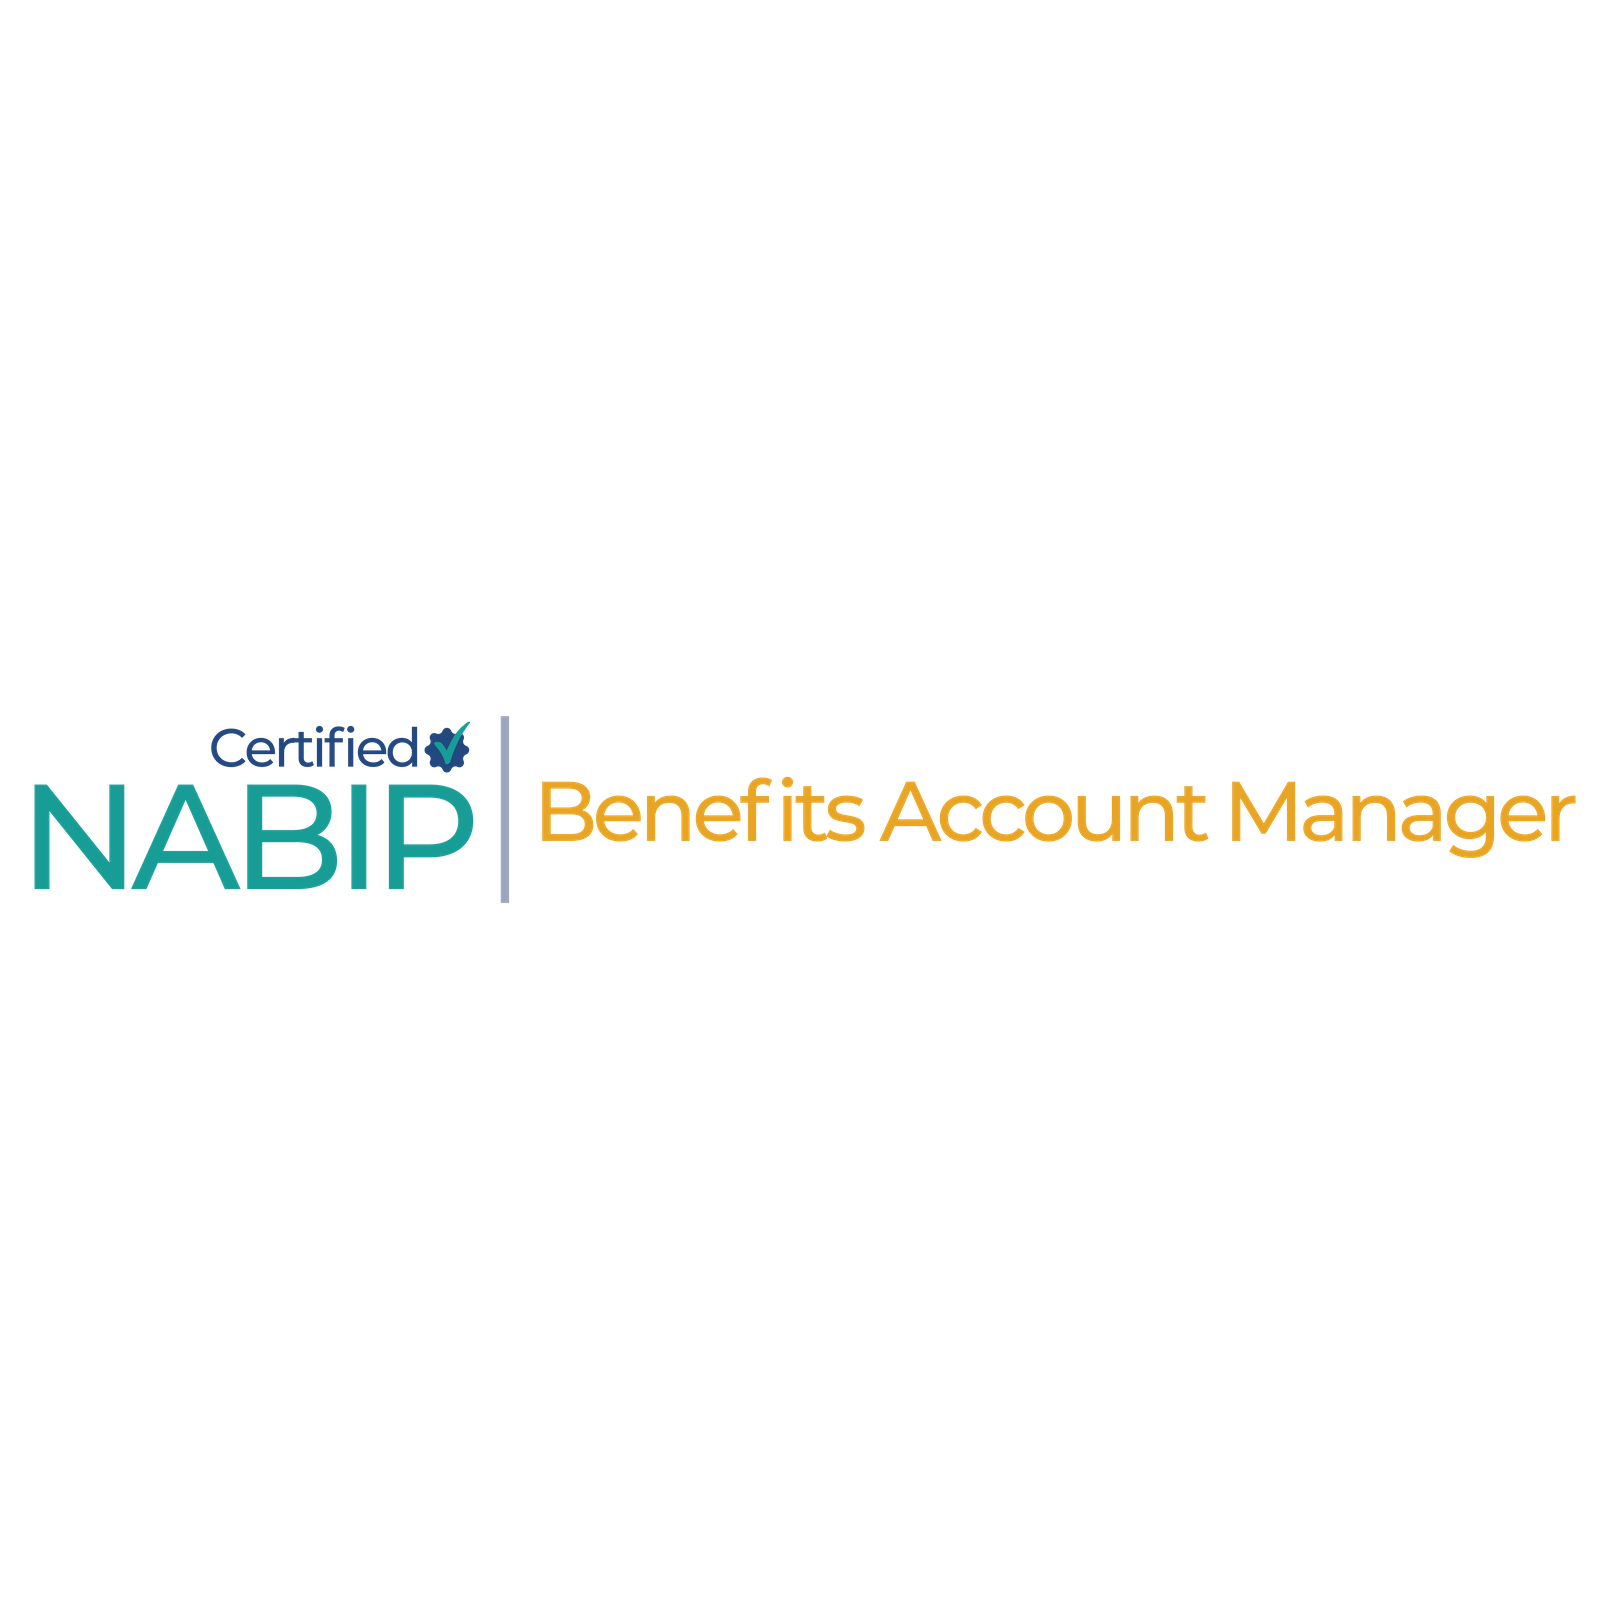 NABIP Course Logos No Background Benefits Account Manager Square